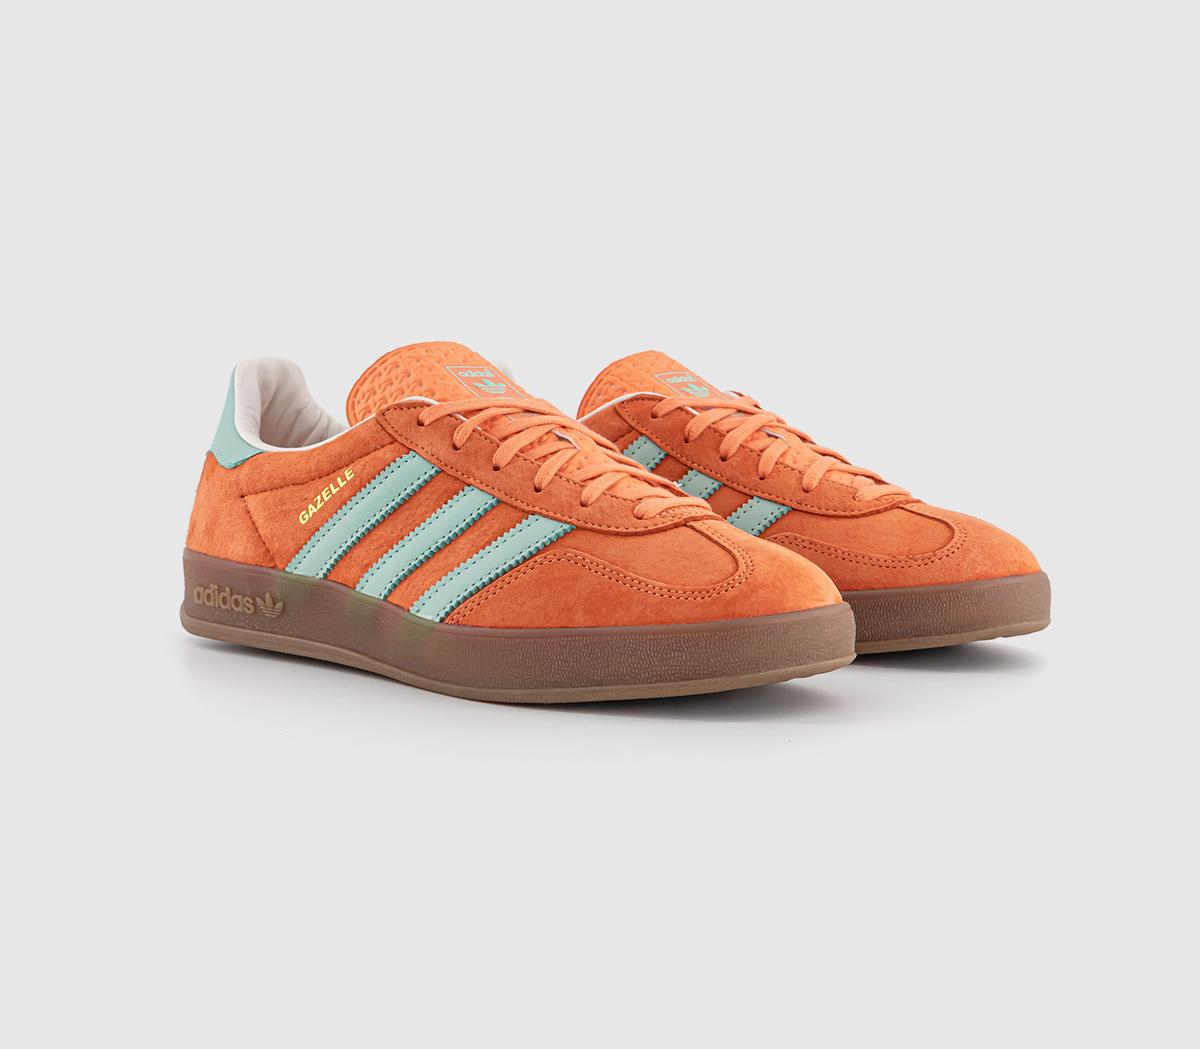 Adidas Gazelle Indoor Trainers Easy Orange Clear Mint Gum Red, 12